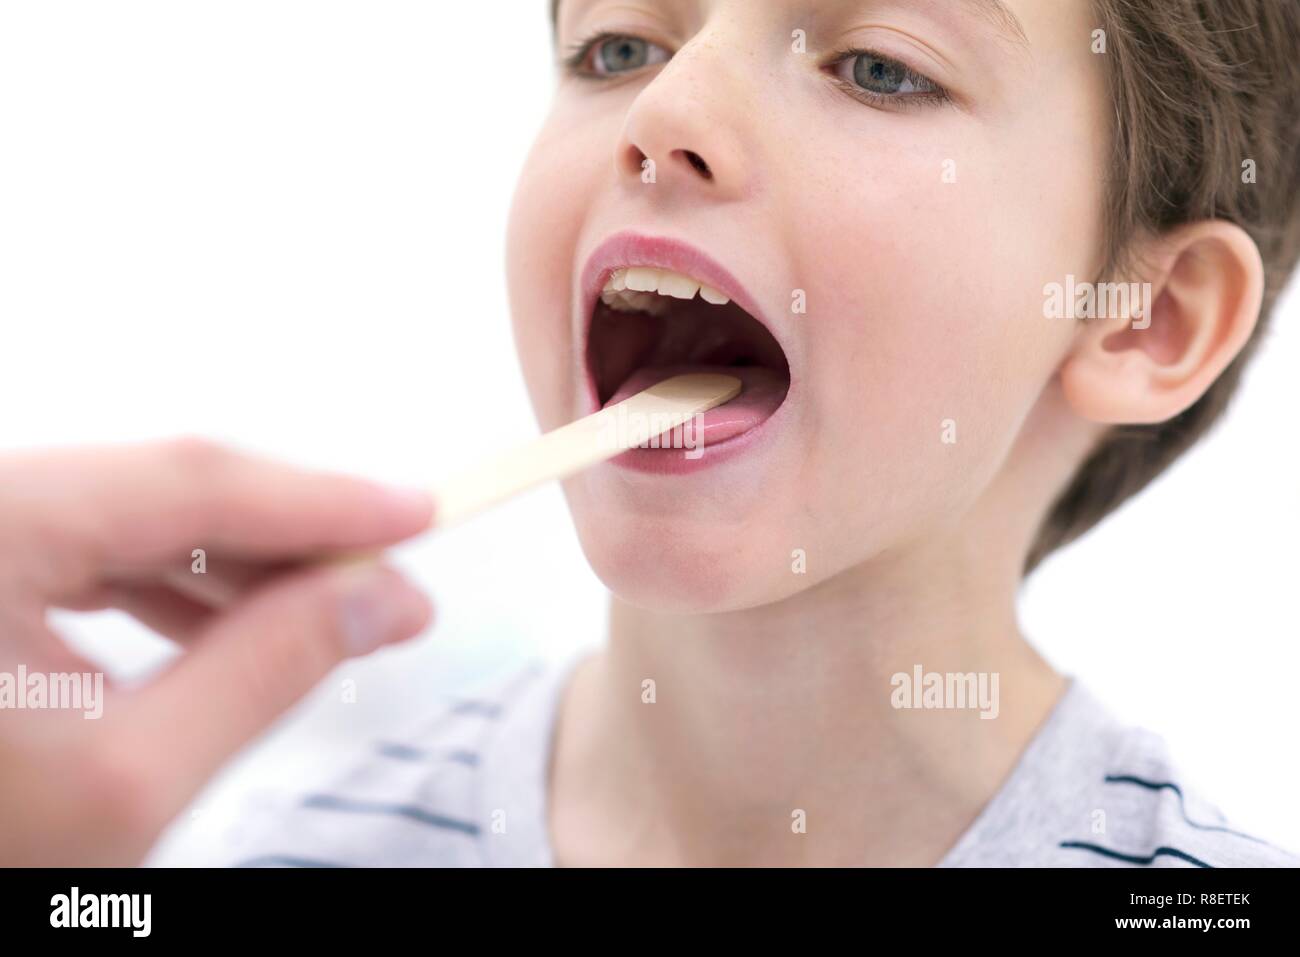 Boy with mouth open and tongue depressor. Stock Photo